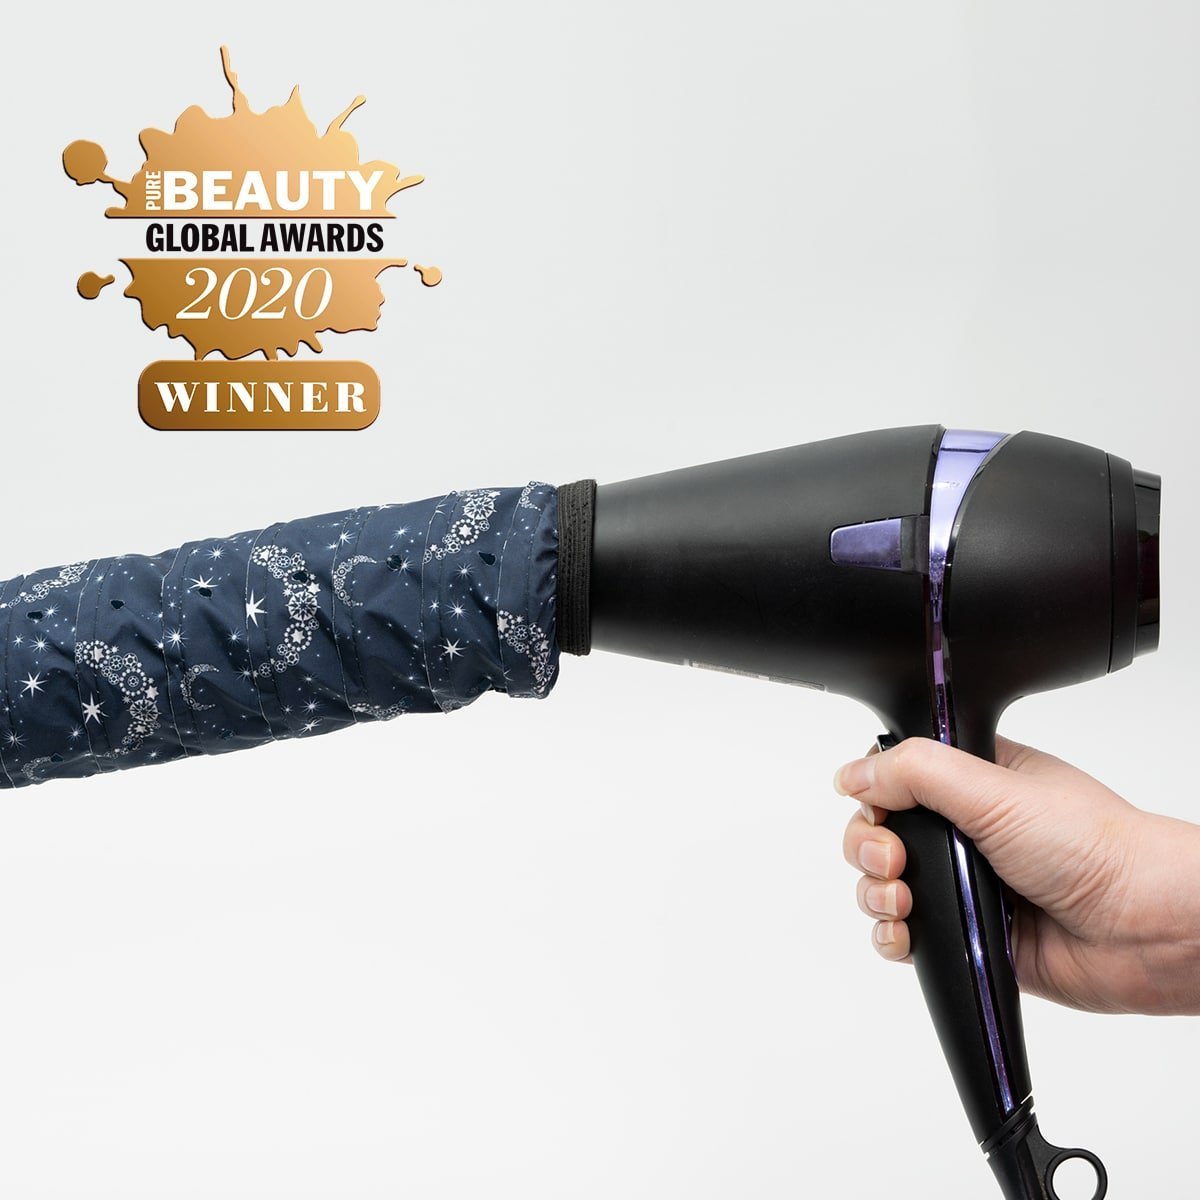 Bright as a Star edition Softhood® on dryer - WINNER of the Pure Beauty awards 'Best New Inclusive Hair Product' 2020